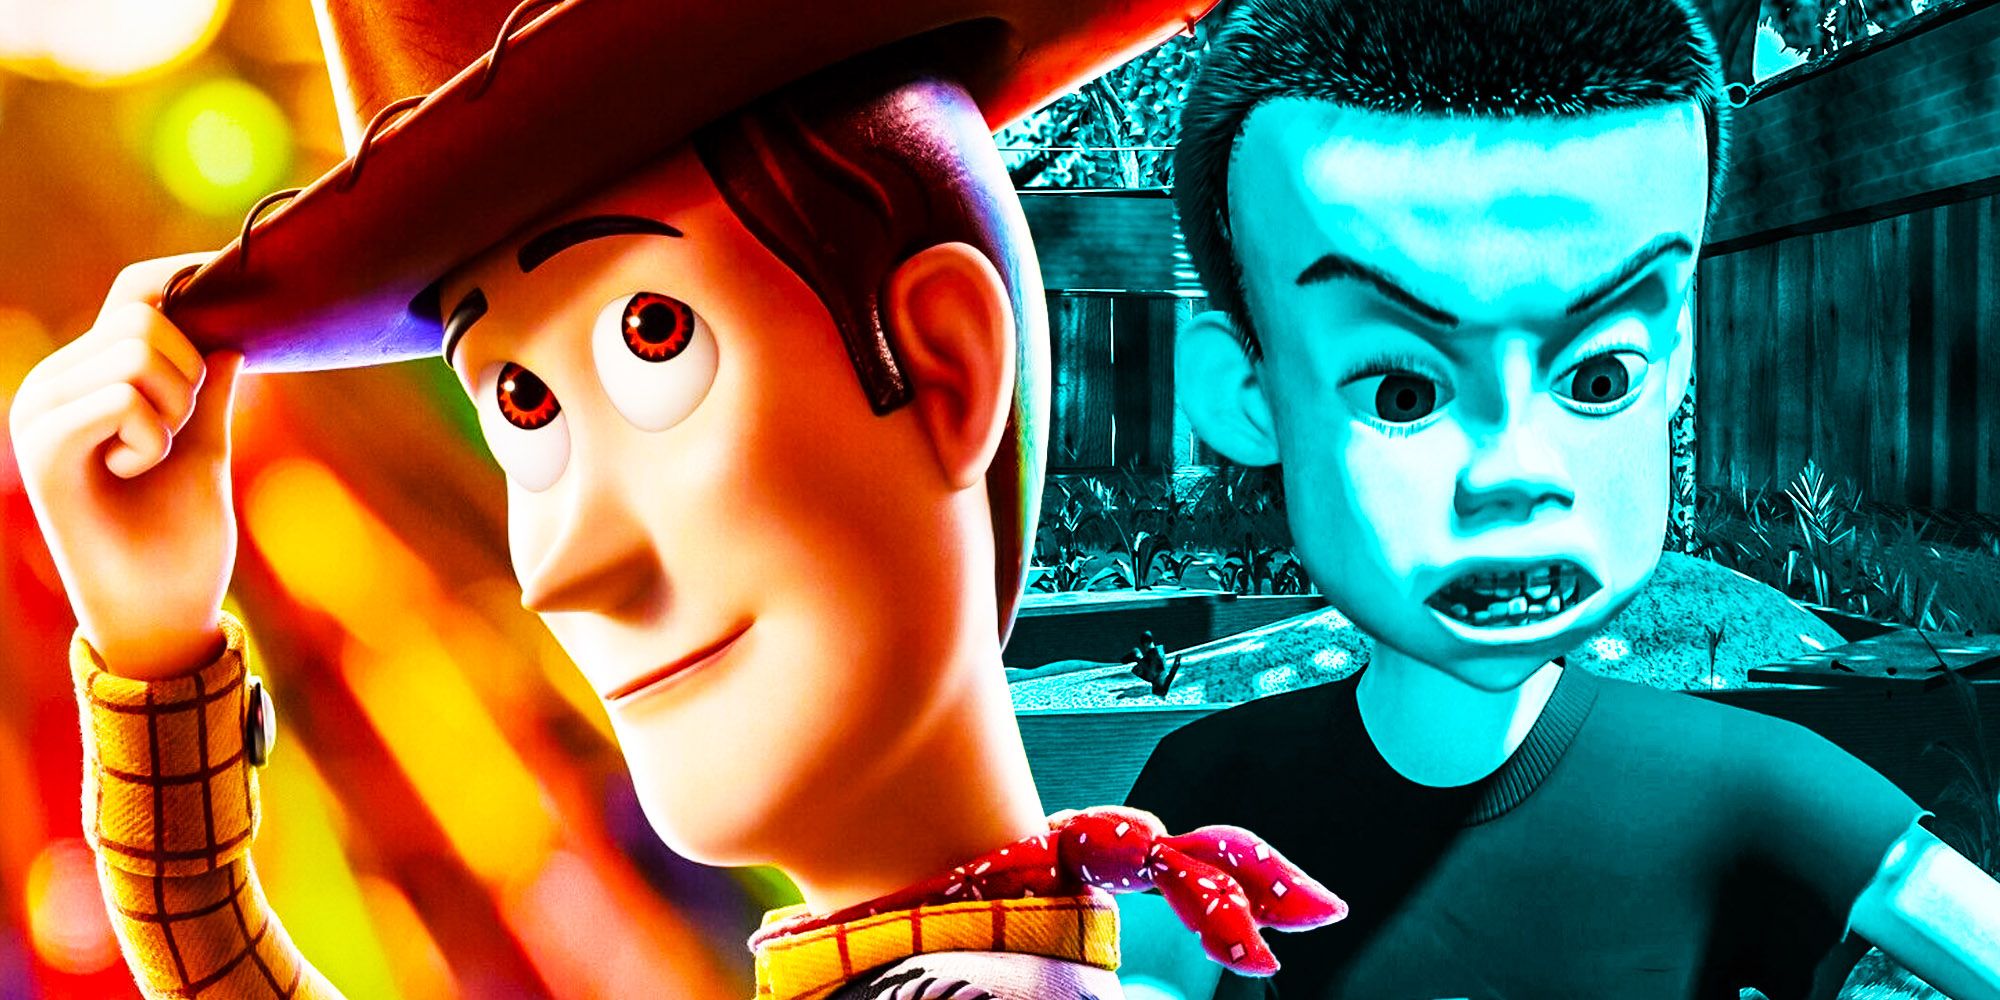 The dark side of Toy Story